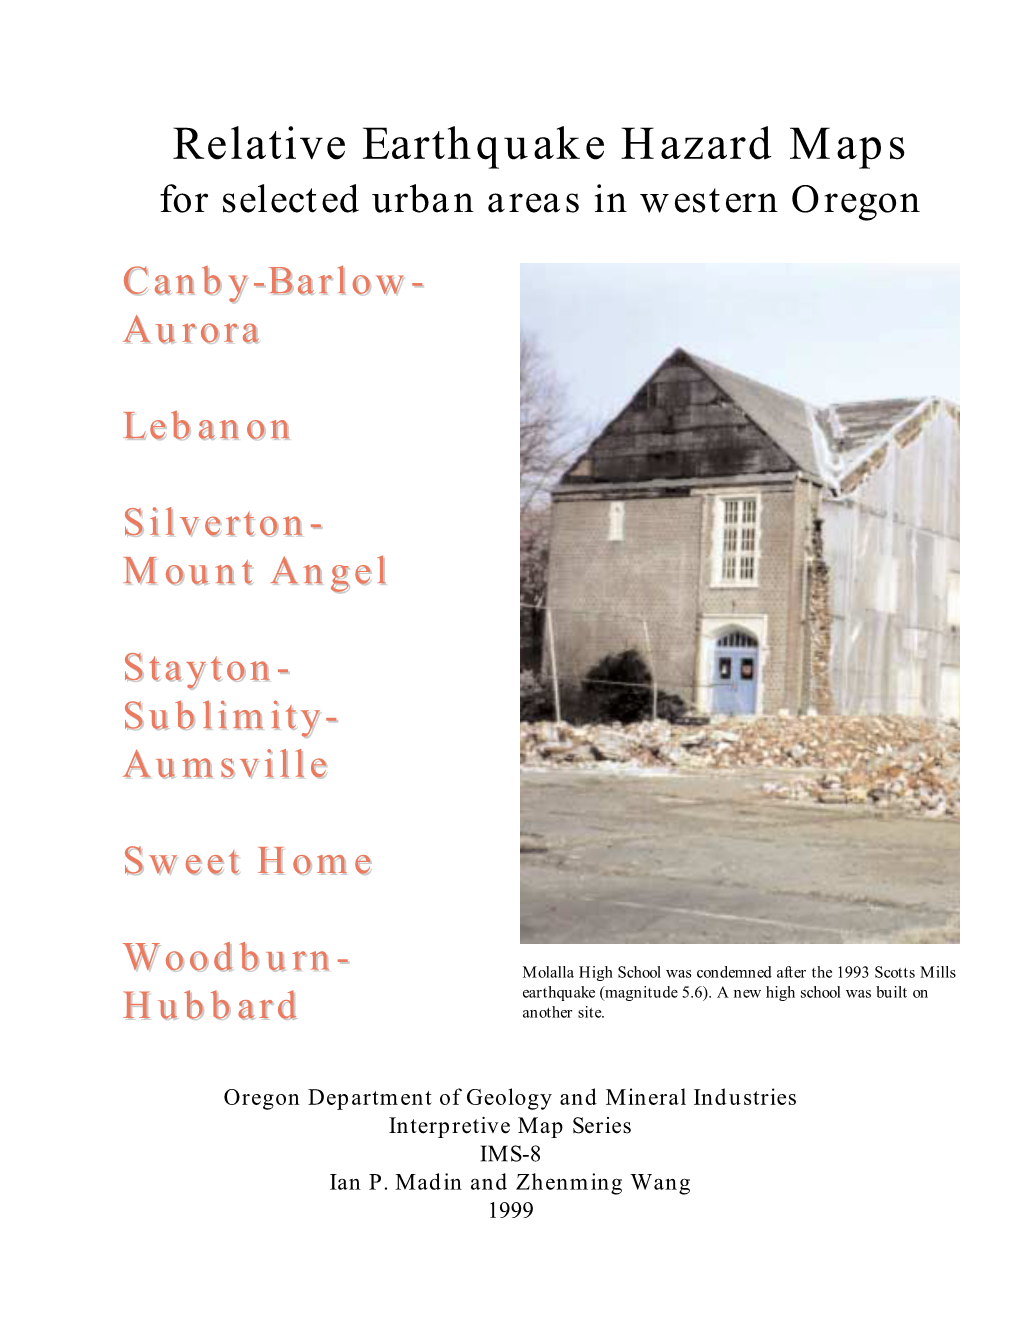 Relative Earthquake Hazard Maps for Selected Urban Areas in Western Oregon